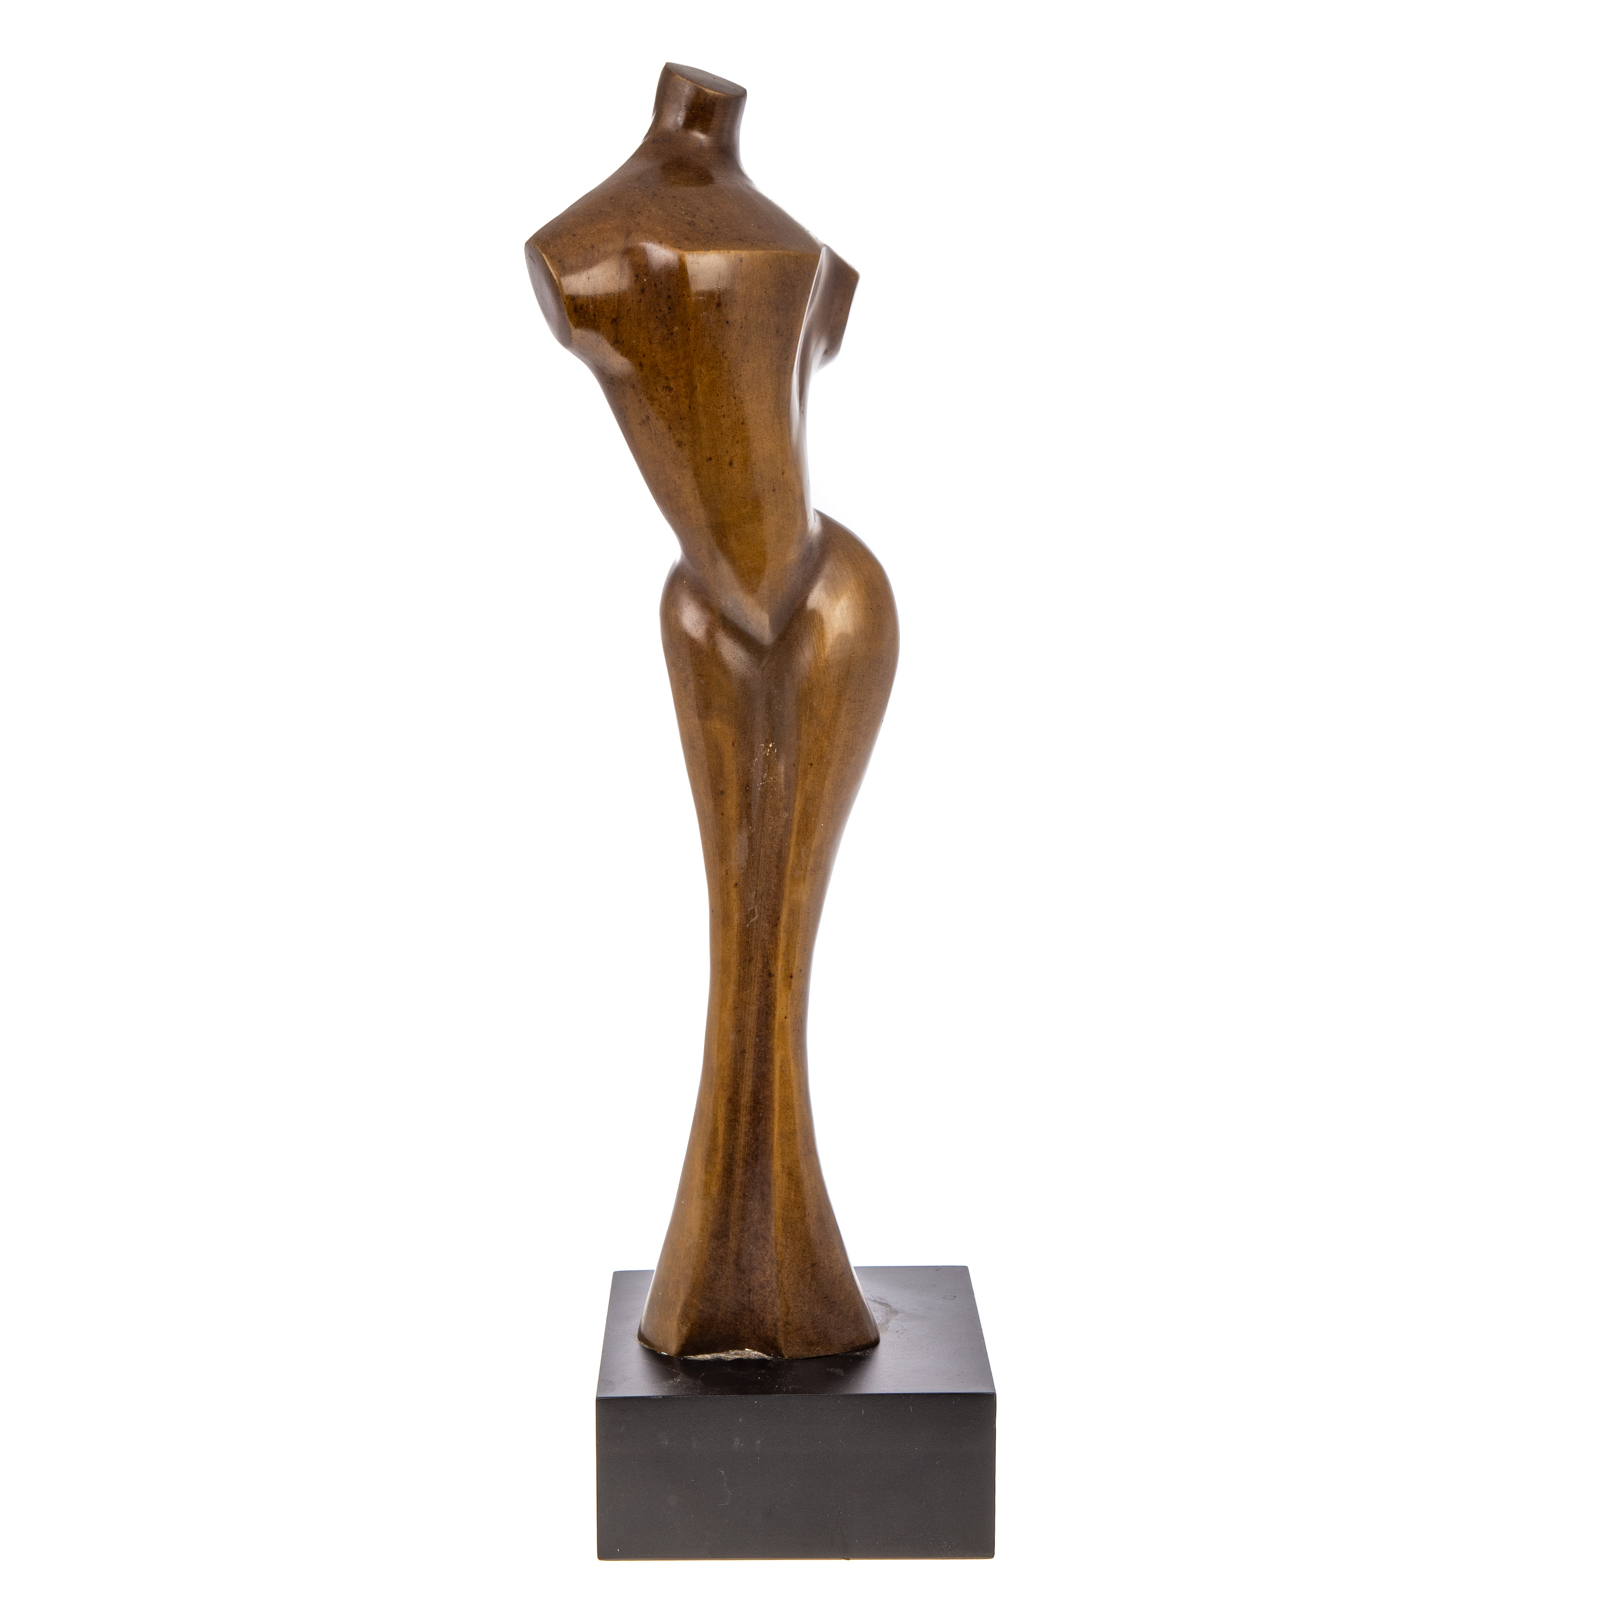 20TH CENTURY ABSTRACT FEMALE SCULPTURE  36a60b